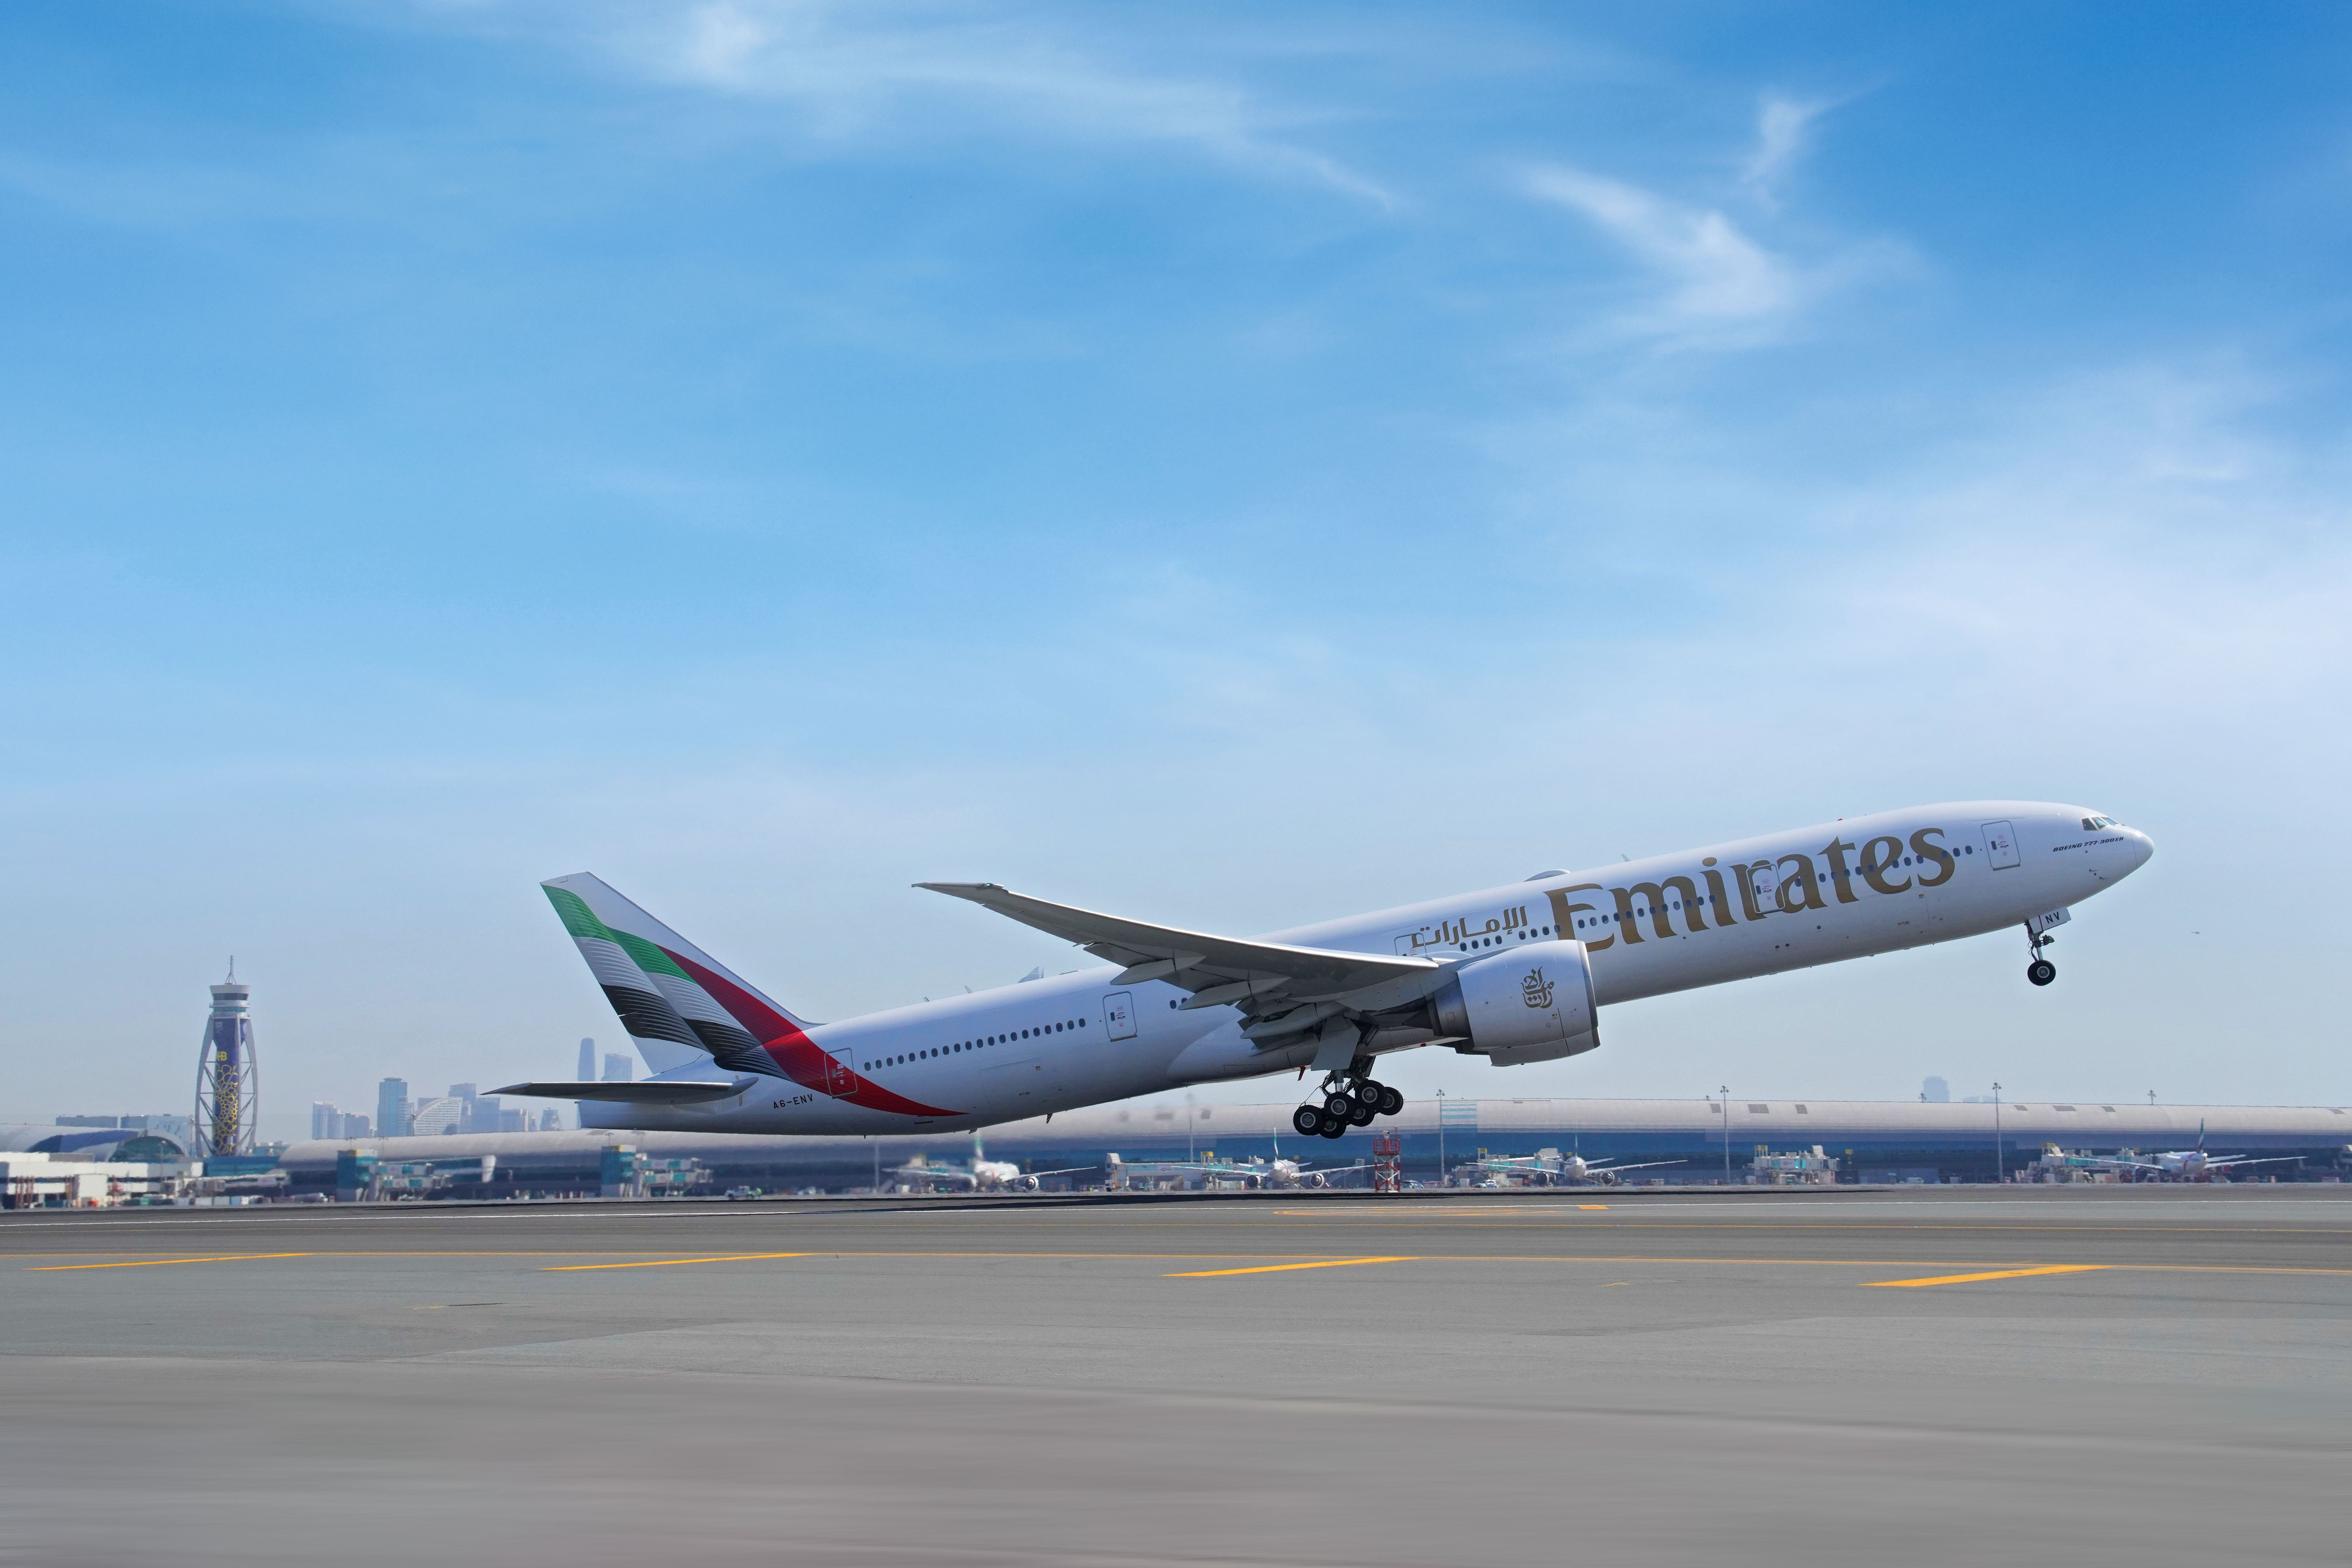 Emirates Boeing 777-300ER with new livery